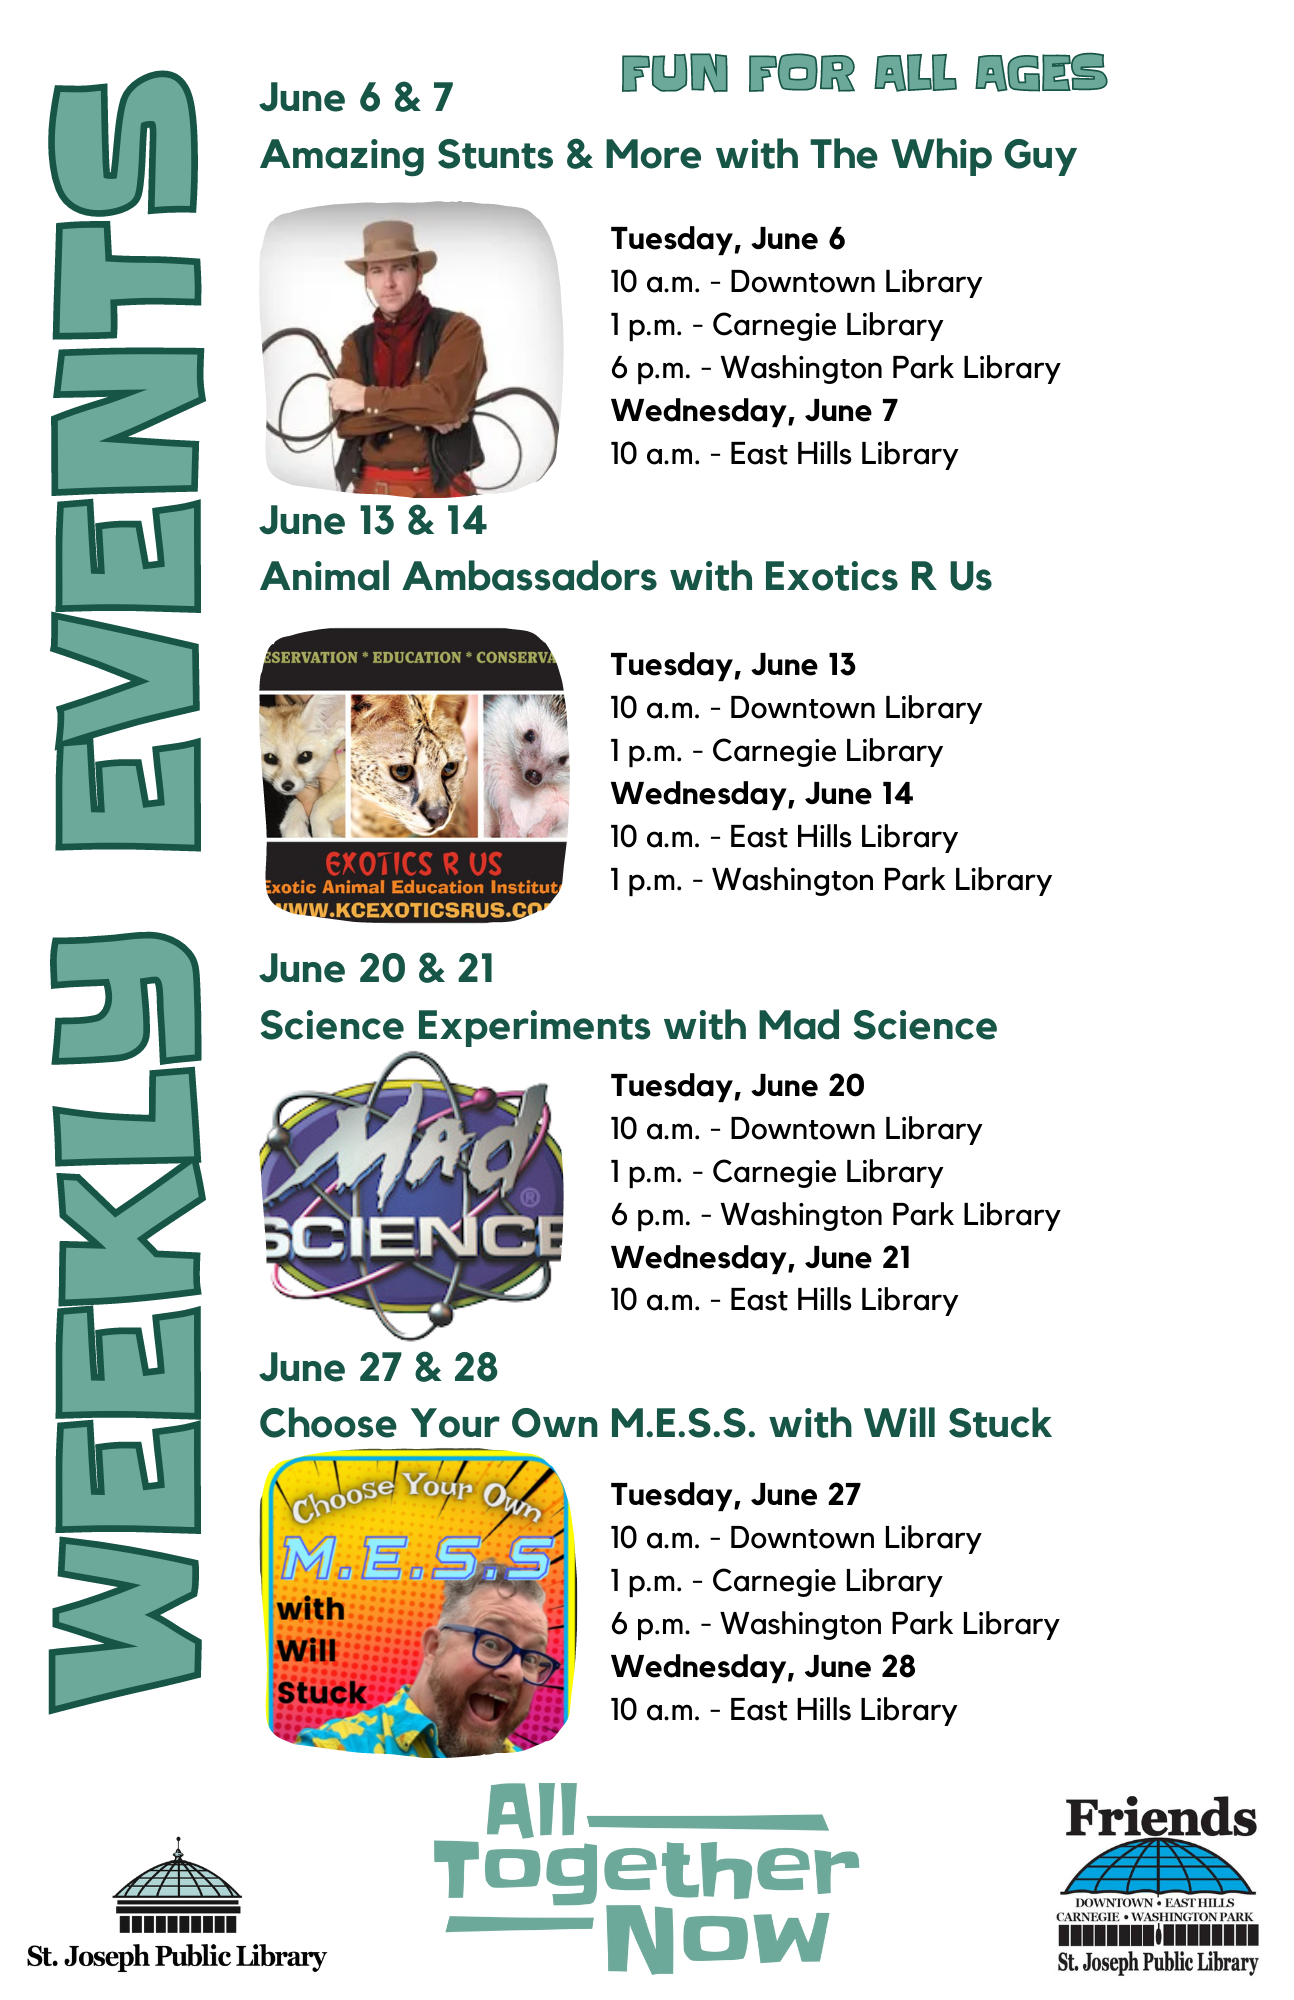 Summer Reading Weekly Events Listings